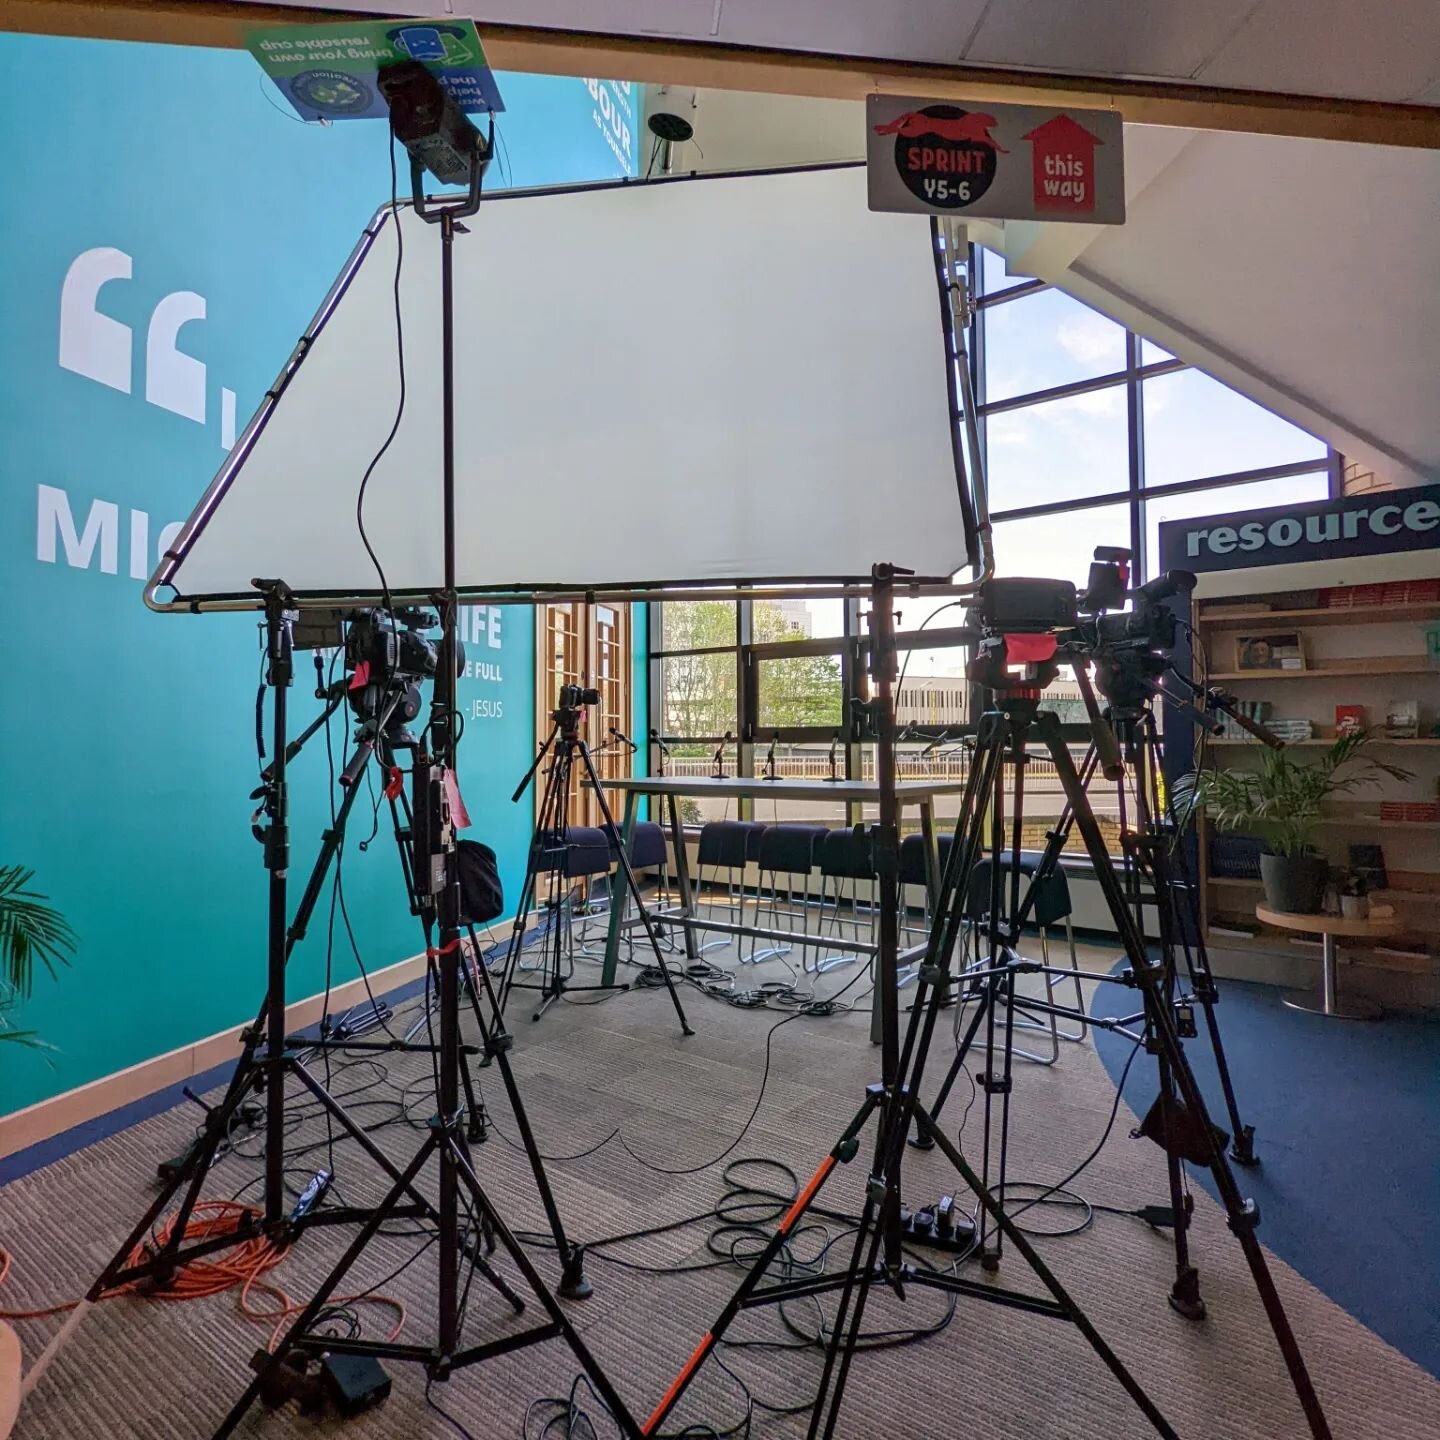 Last Wednesday, we did a 4 camera shoot with 7 guests, as part of our new 'Lets talk about money' series. Due to a really quick turn around we cut the video and mixed the audio live - a first for us and definitely the start of something new going for